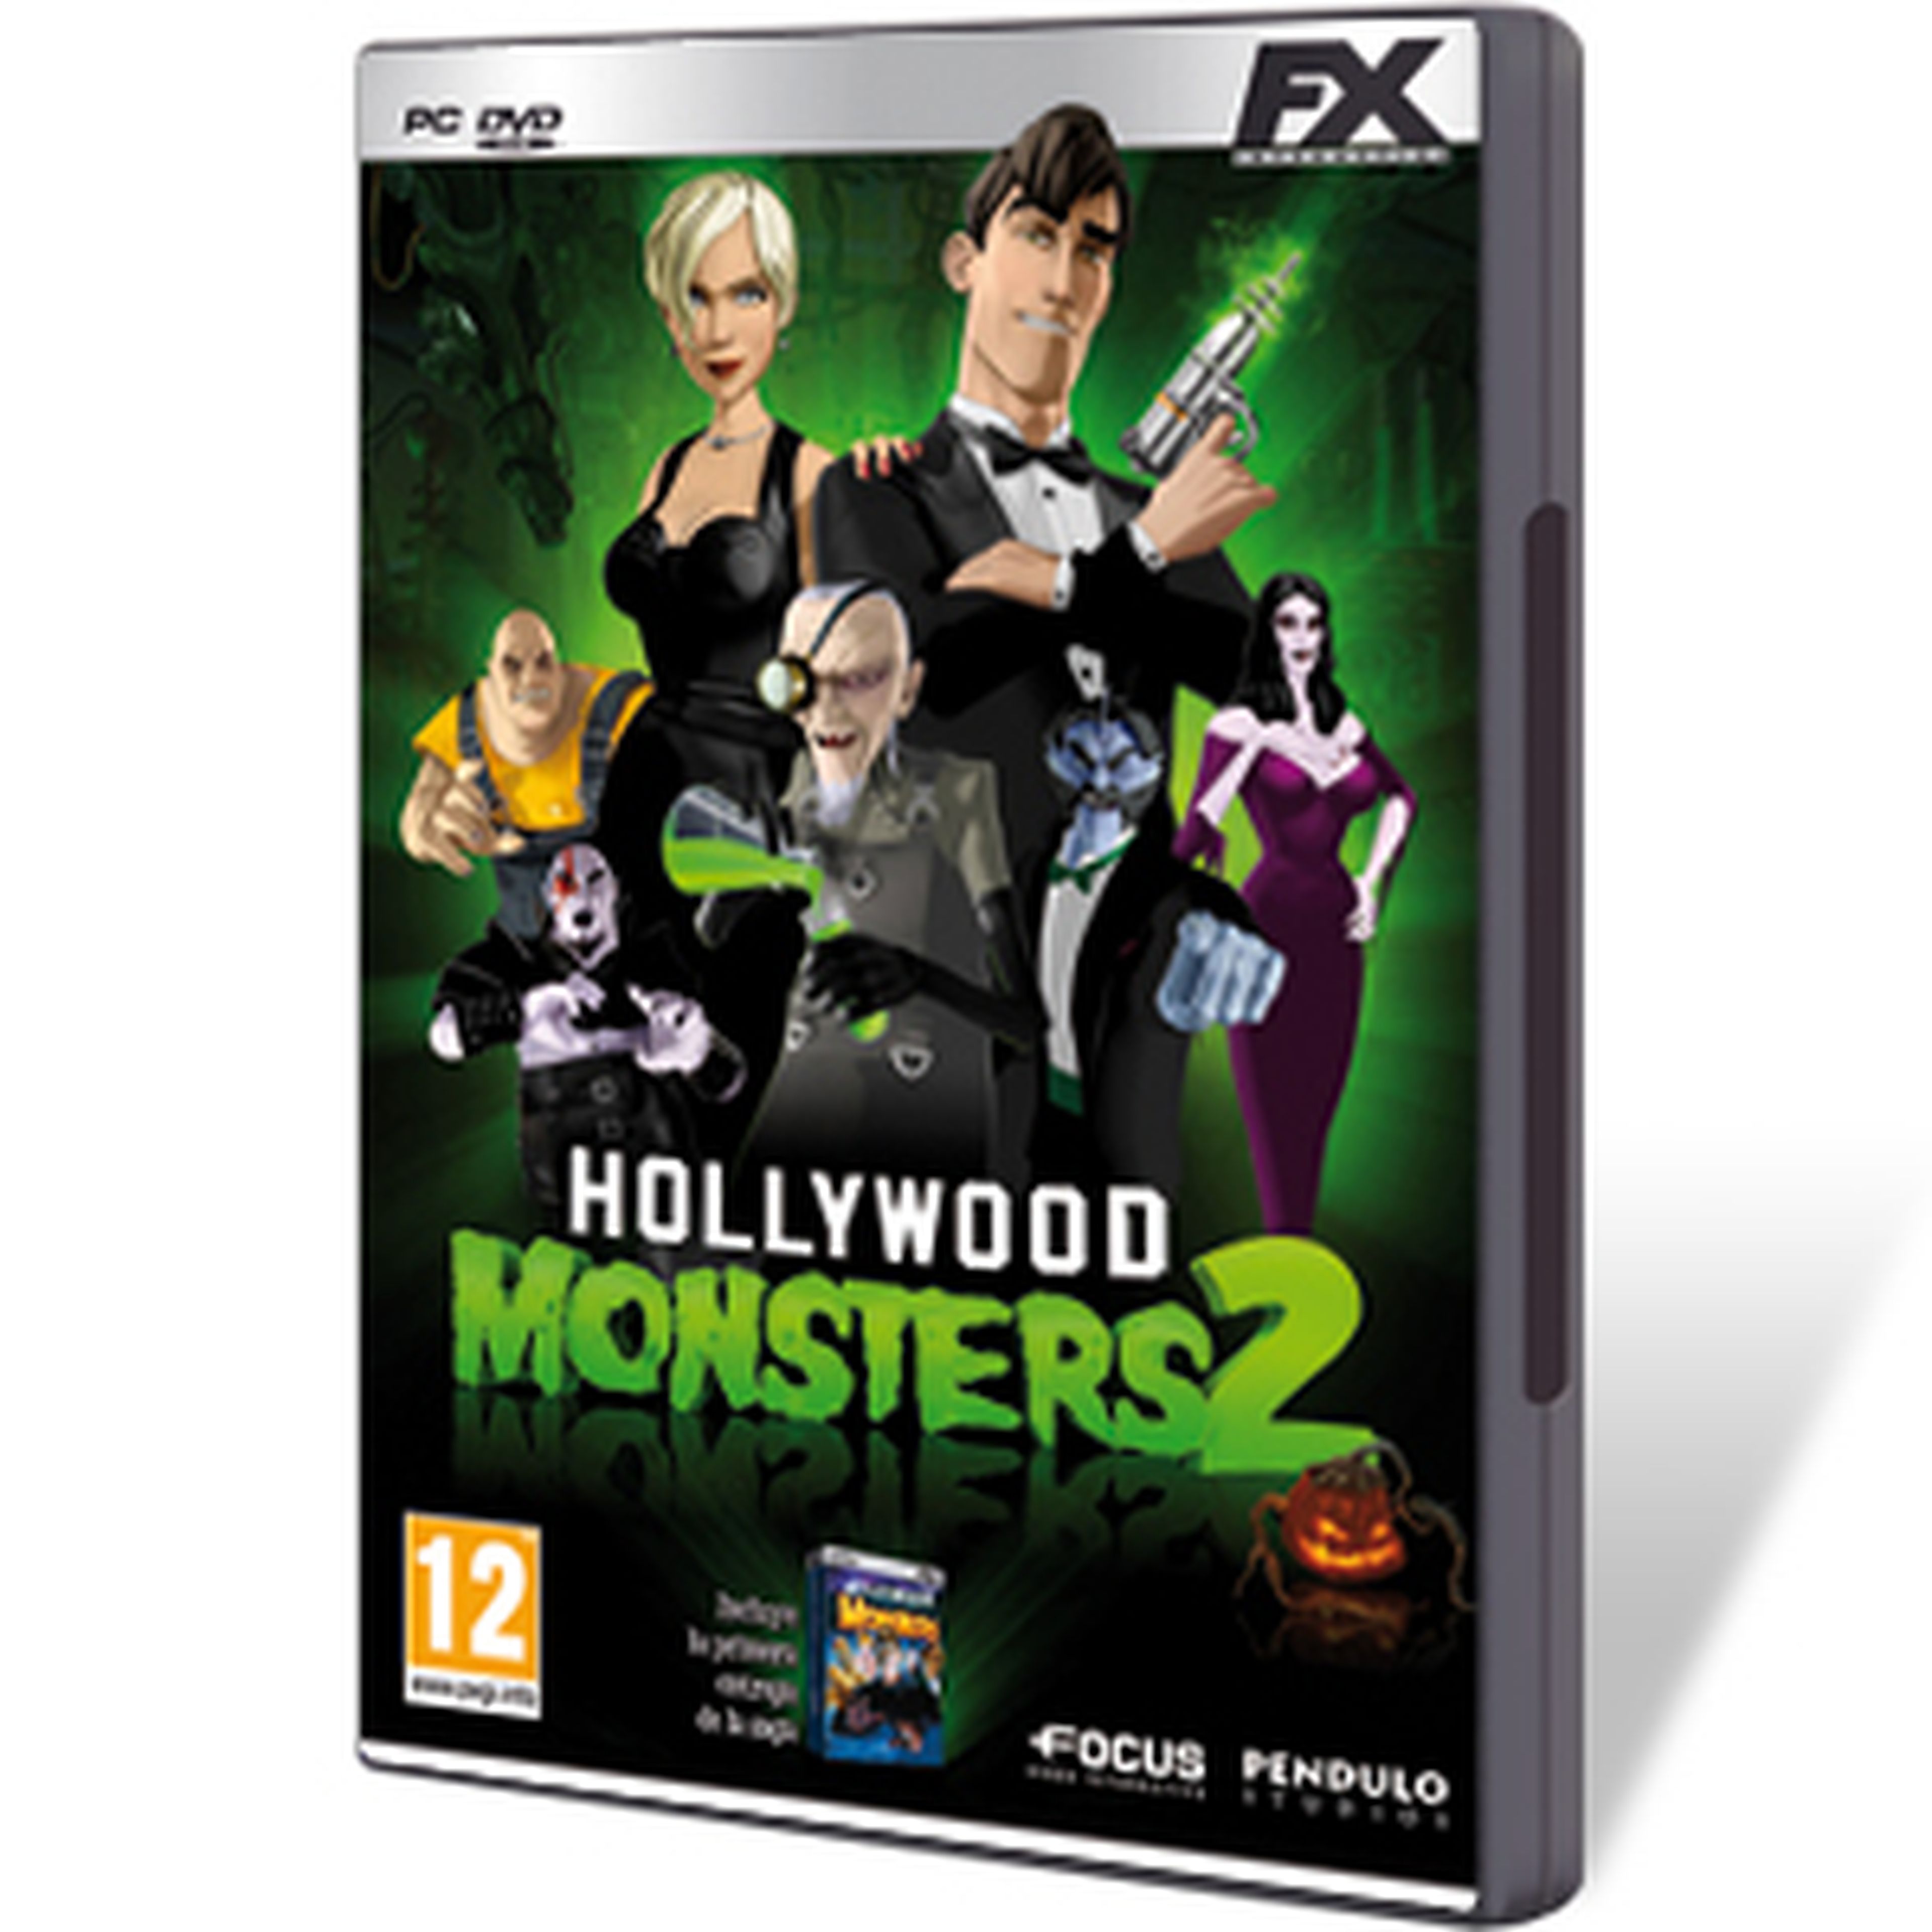 Hollywood Monsters 2 para PC